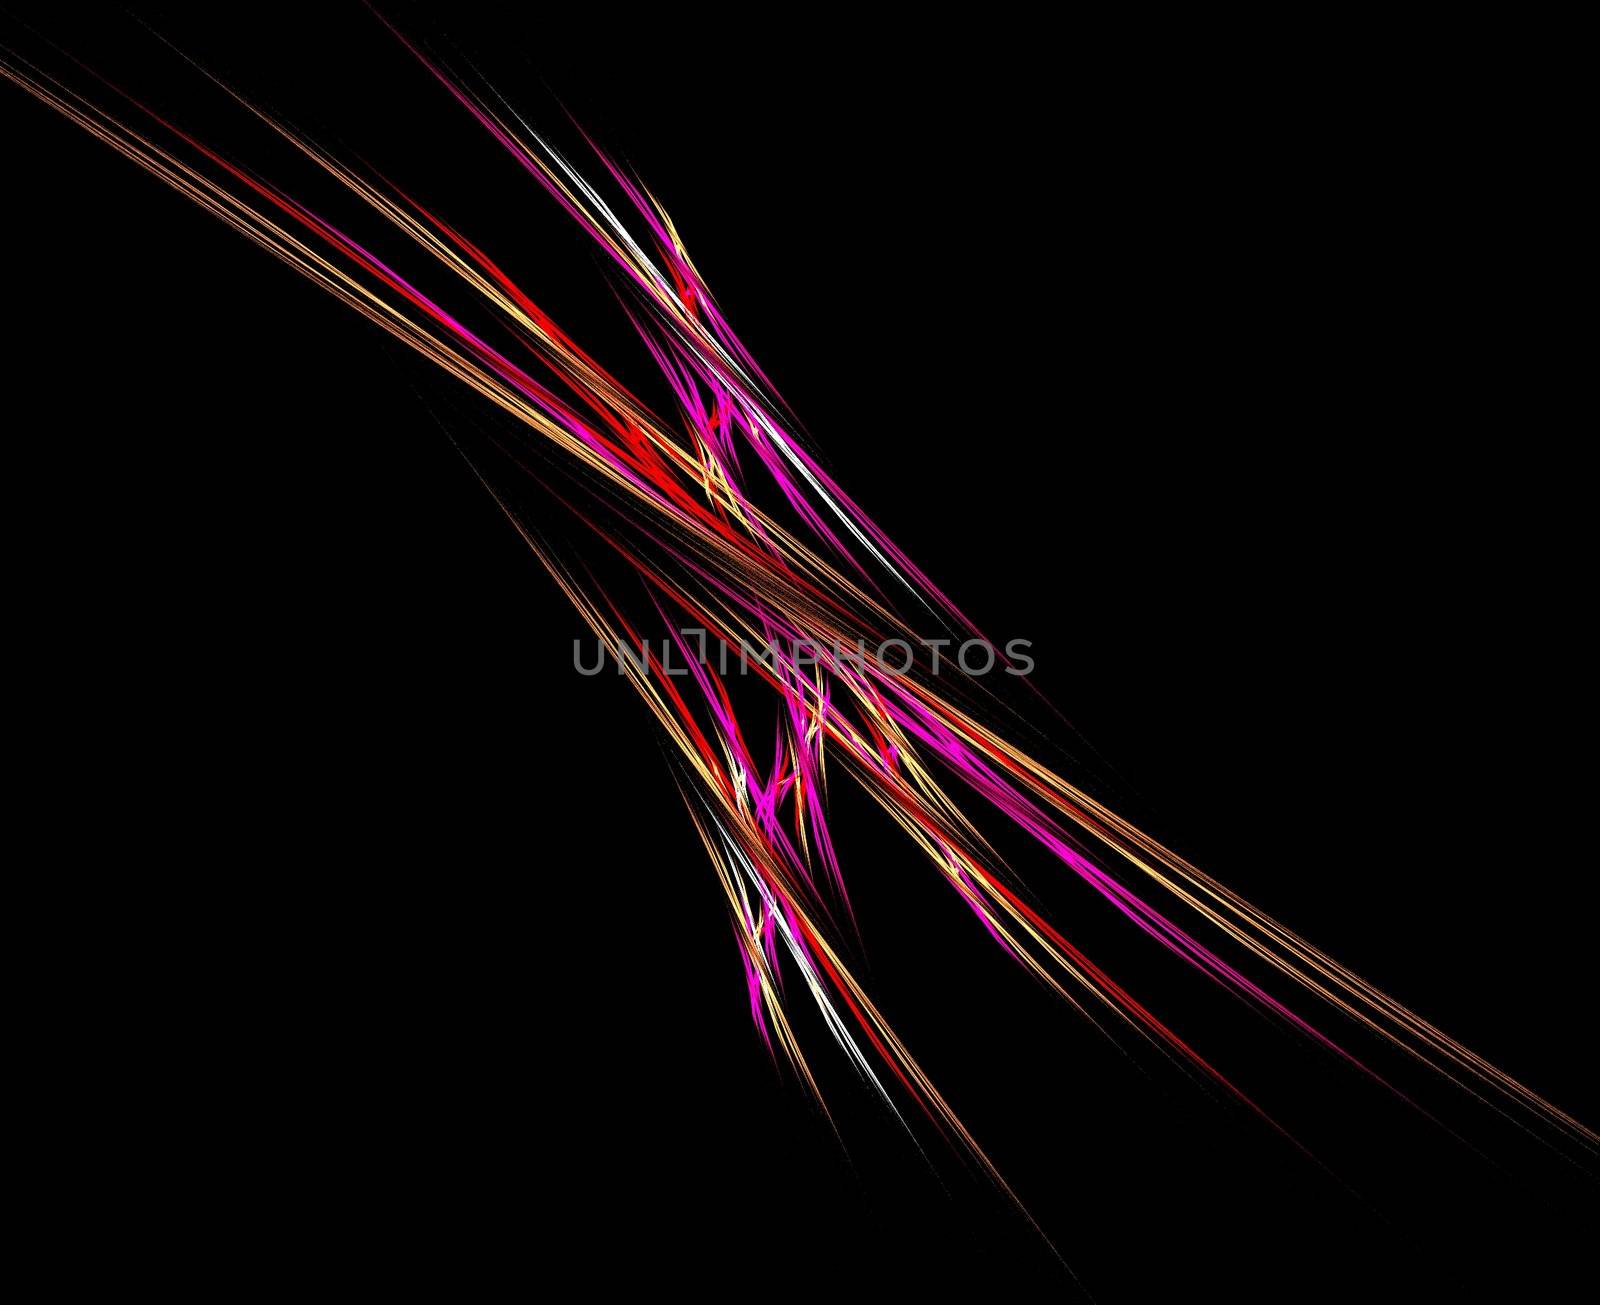 Red lines, light, ray, beam crossing diagonal a black background, plenty of copy space